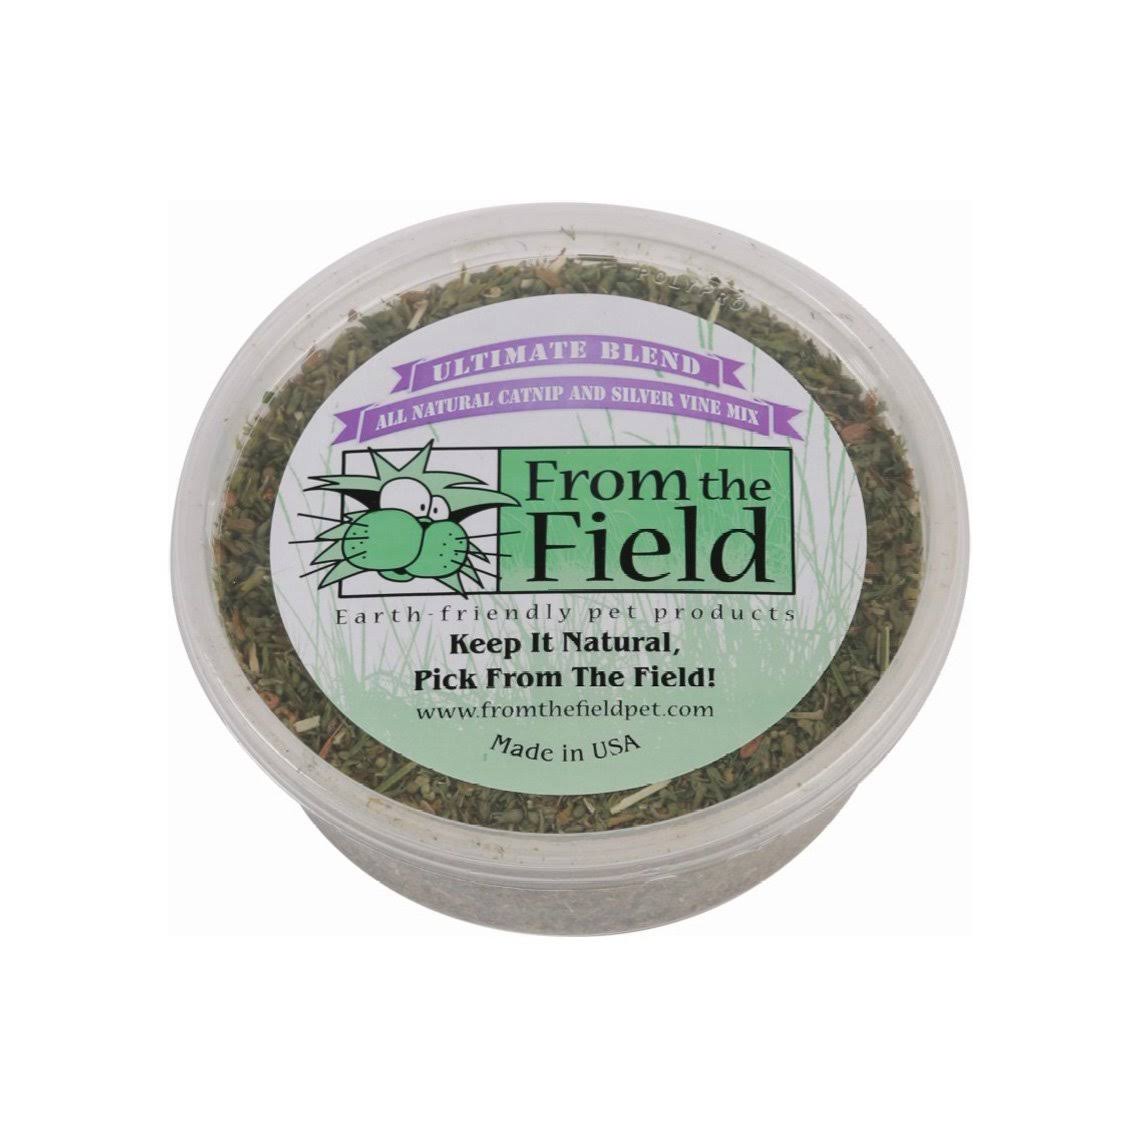 From The Field organic catnip Ultimate Blend 1 oz American grown vine natural